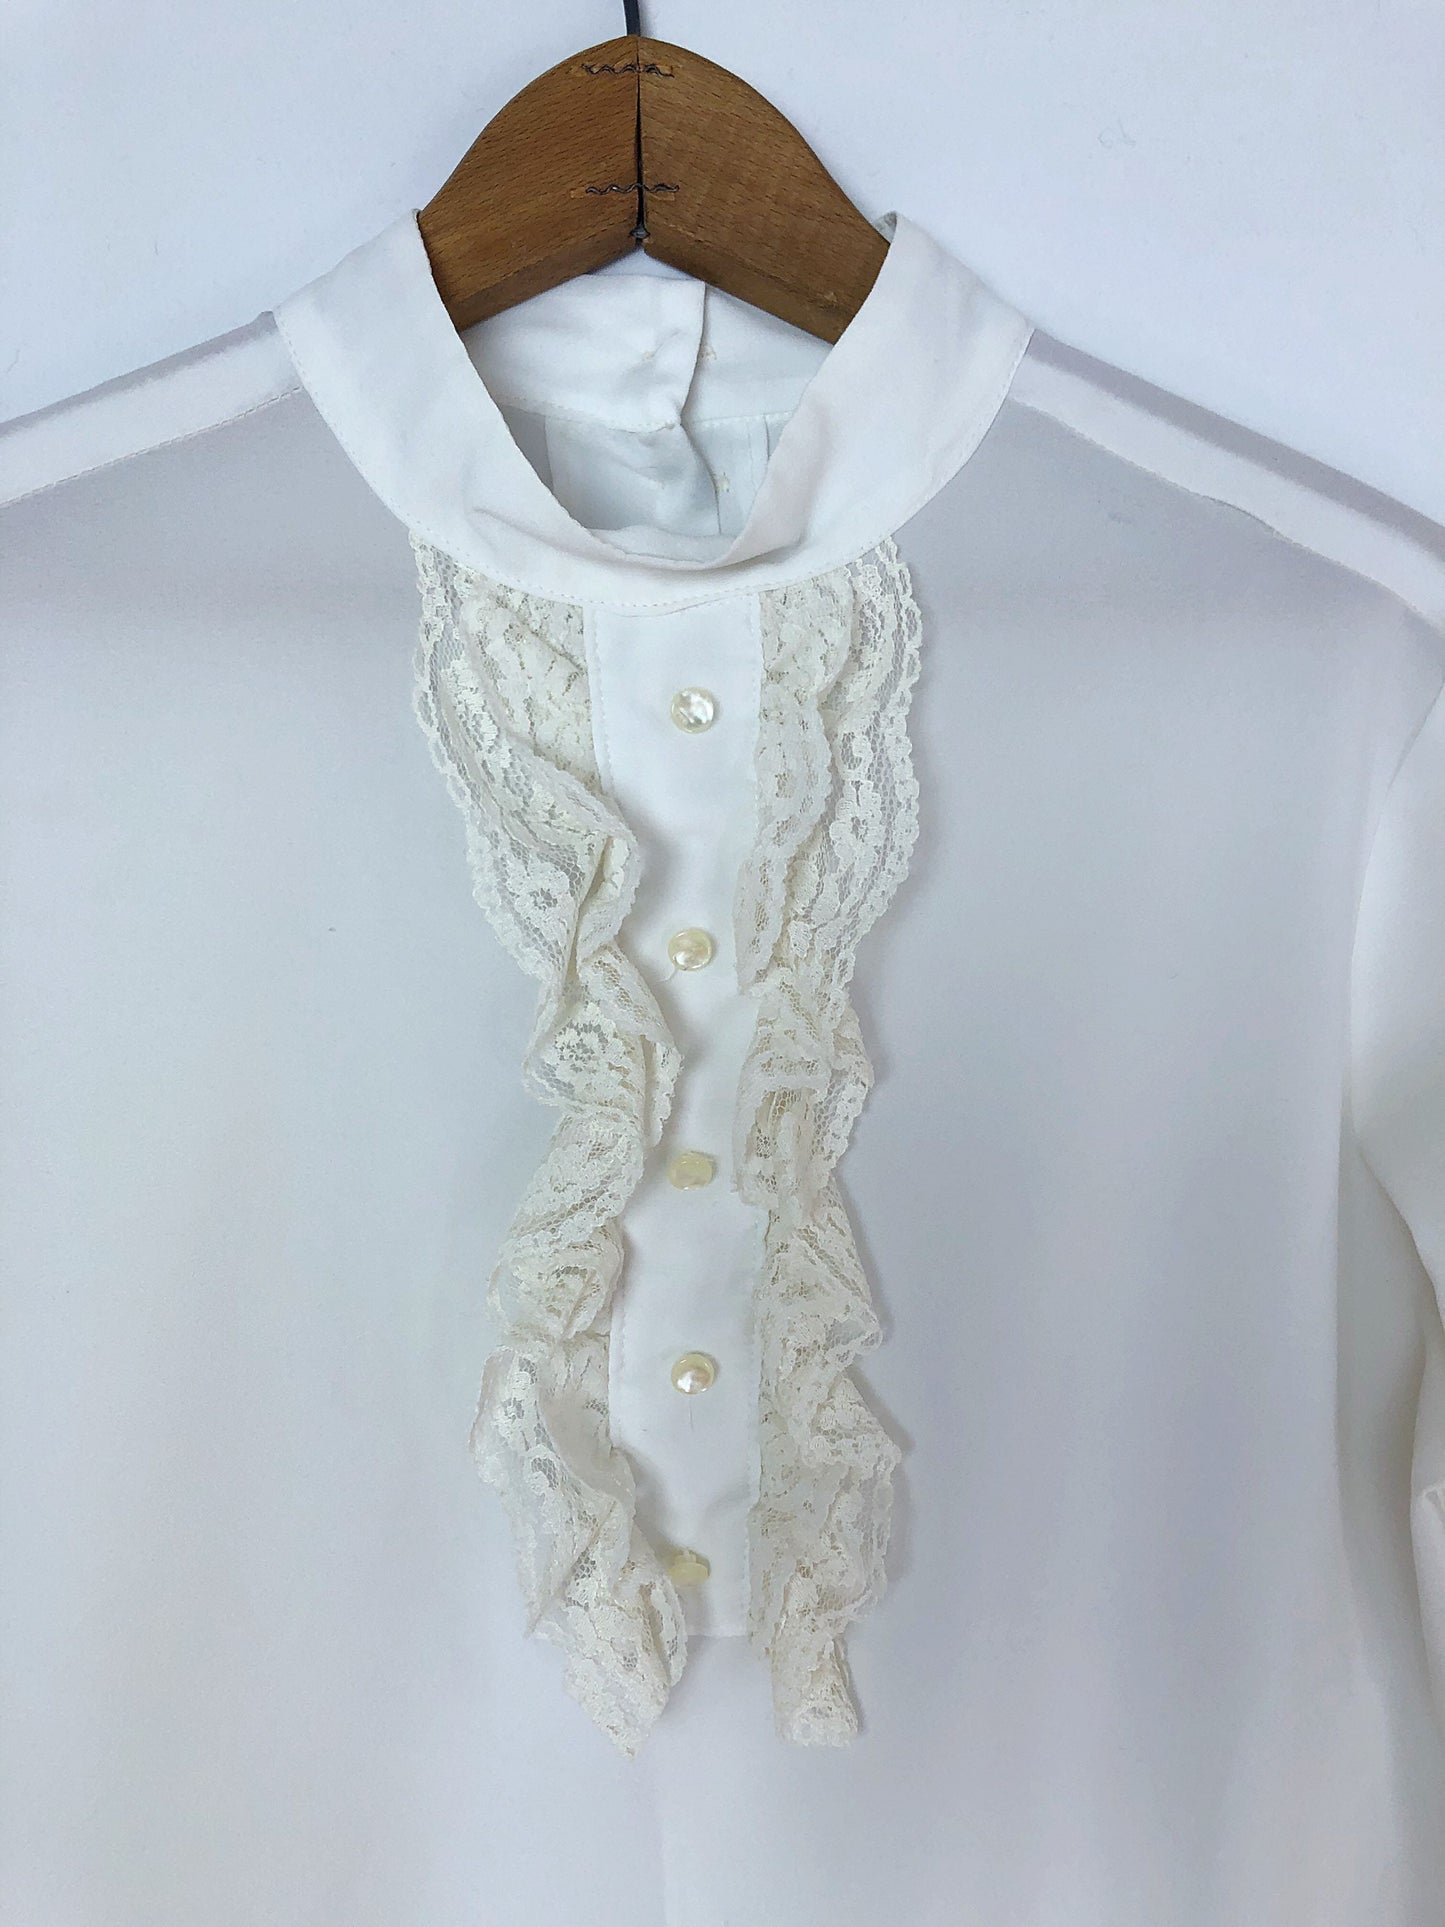 Vintage 50’s White Lace Delicate Silk Ruffle Button Up Blouse Size M